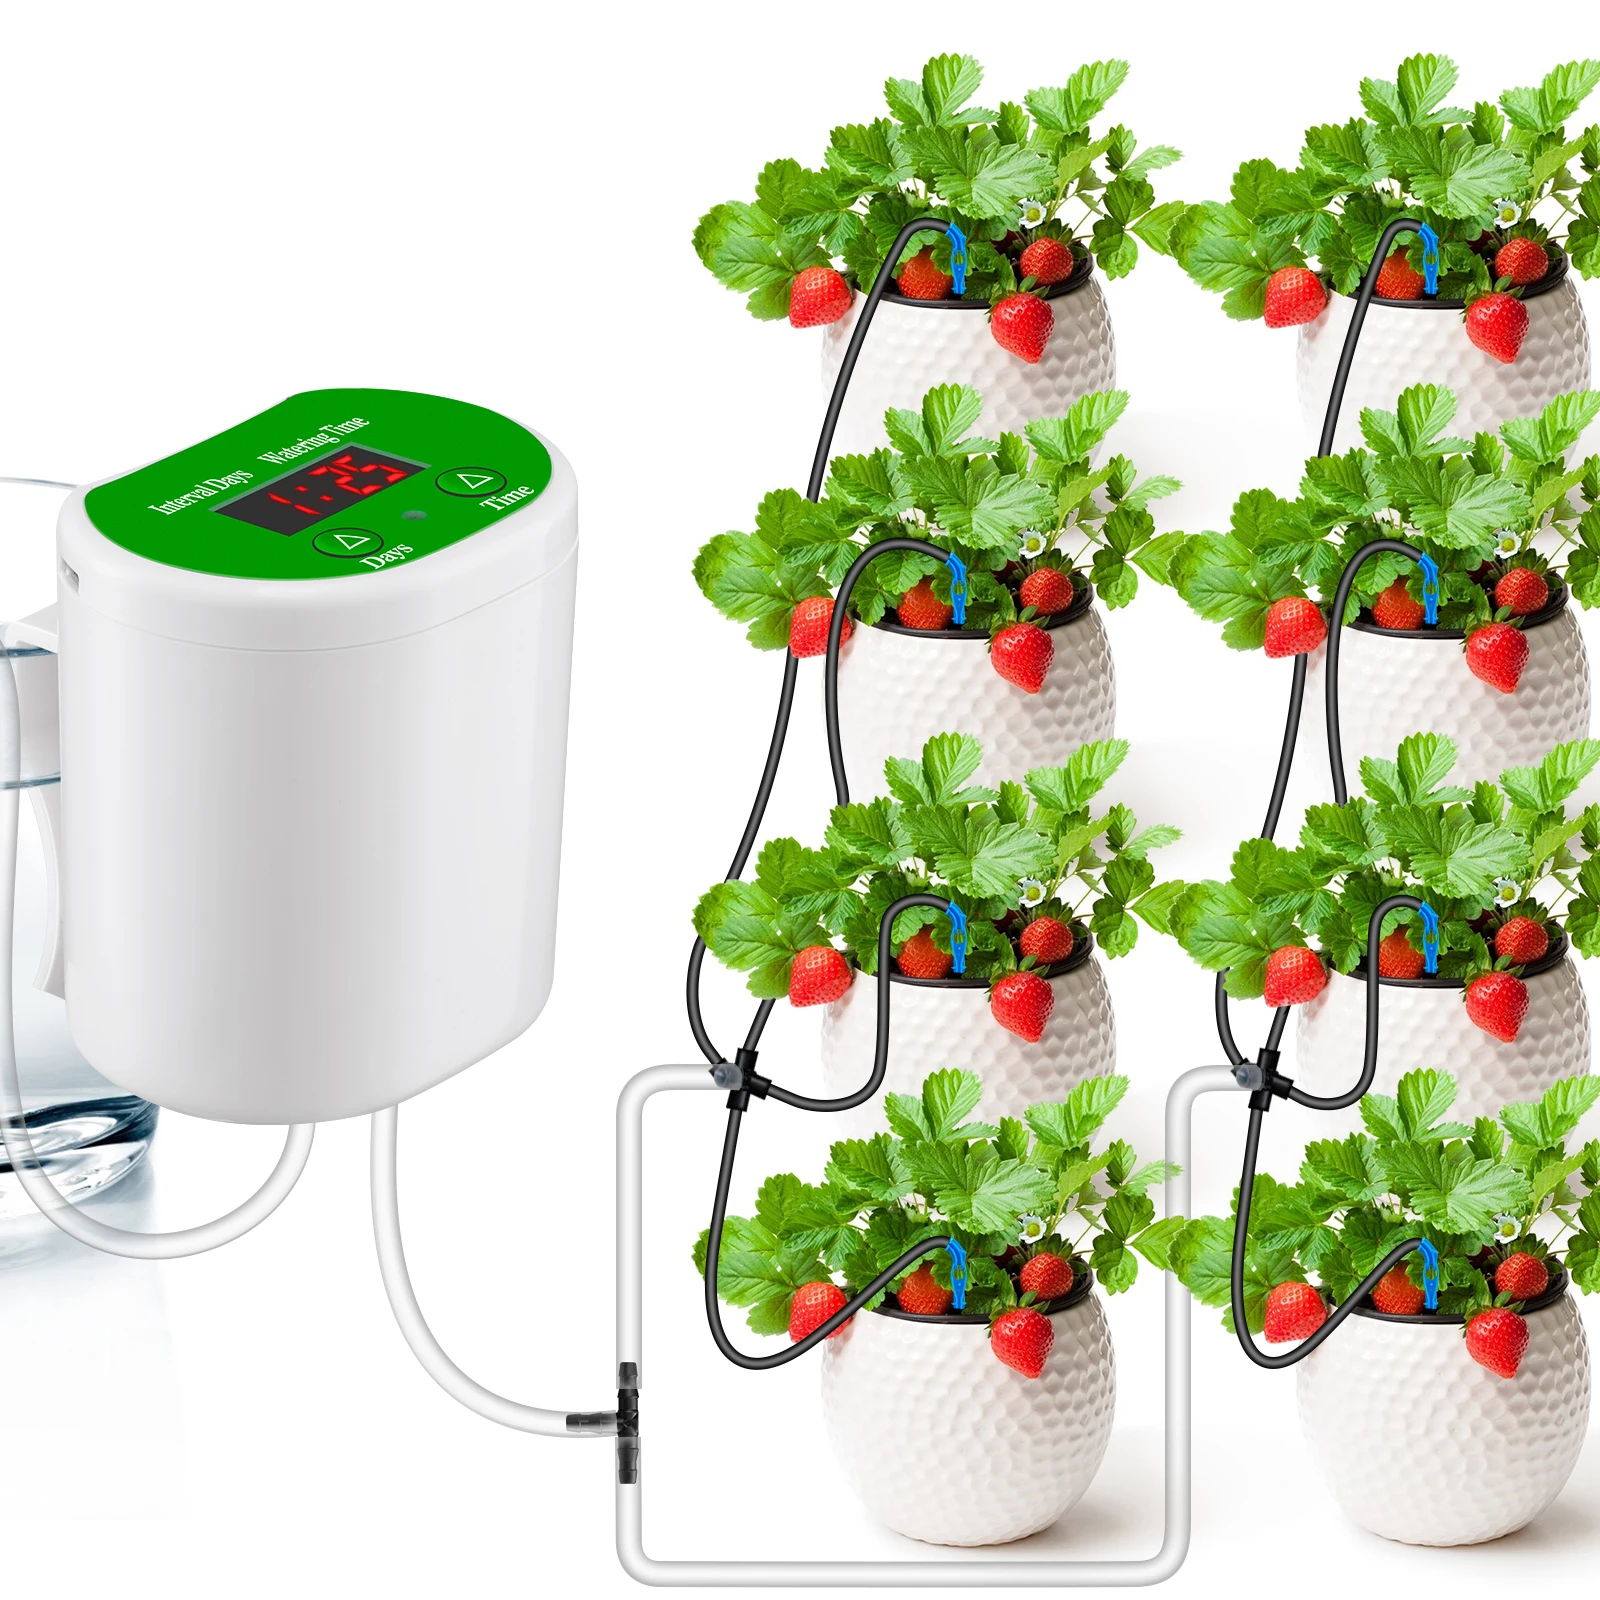 Automatic Watering System Dual Watering Modes Automatic Drip Irrigation Kits Timer Watering Machine for Home  Potted Plants